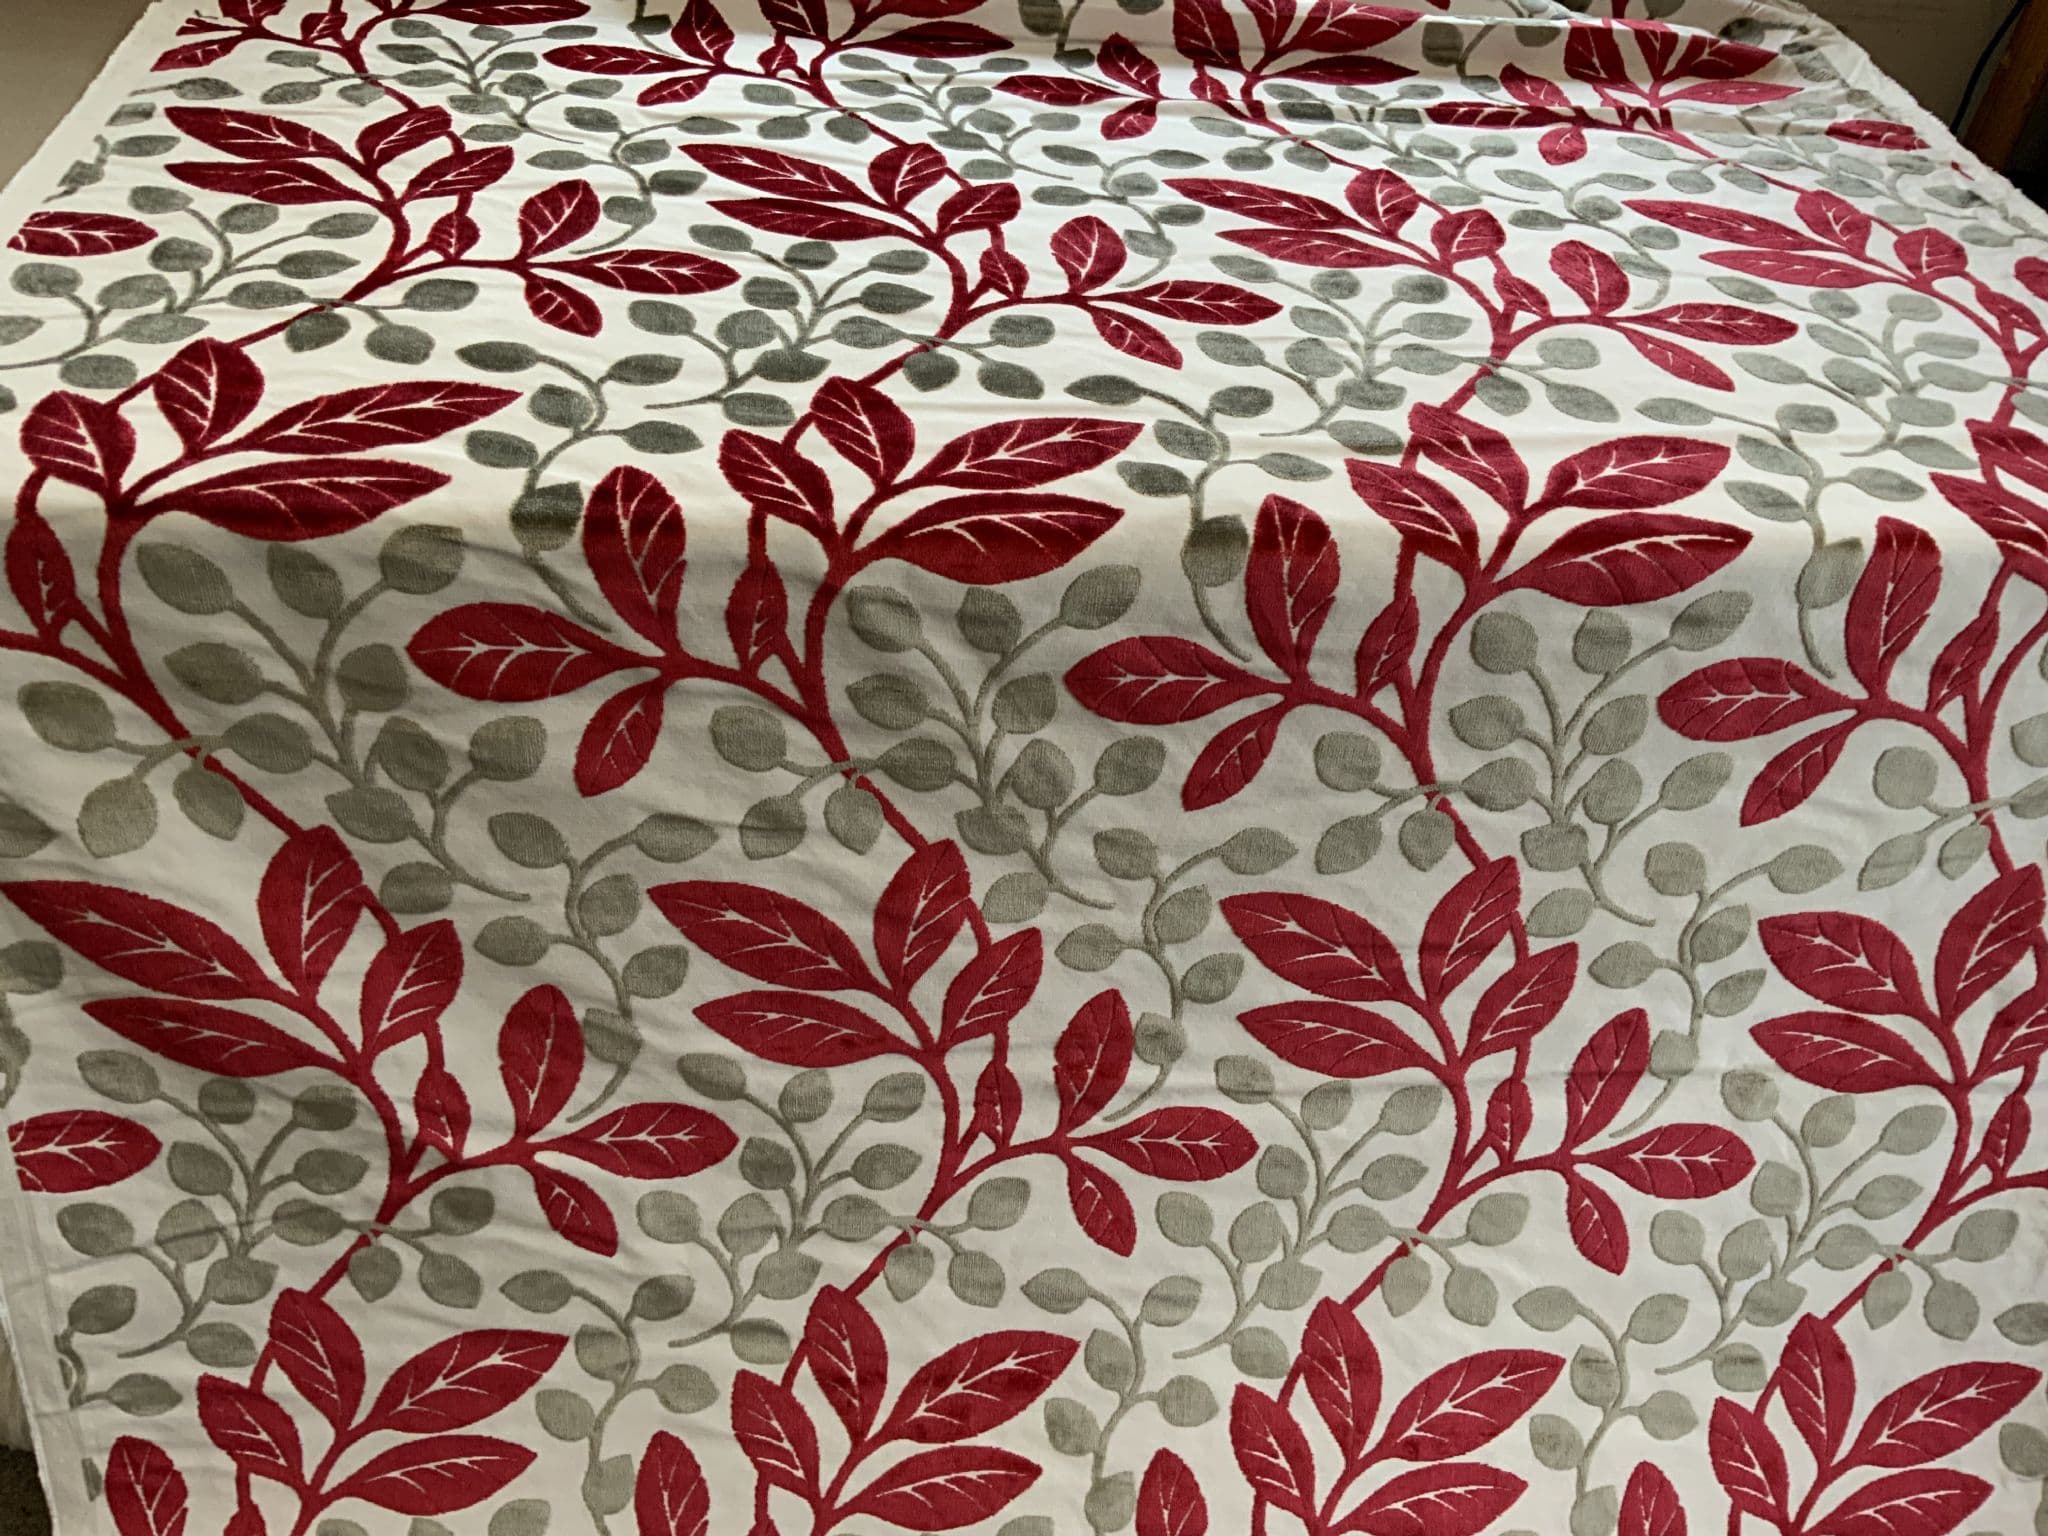 Red and Grey Cut Velvet in a Botanical Design